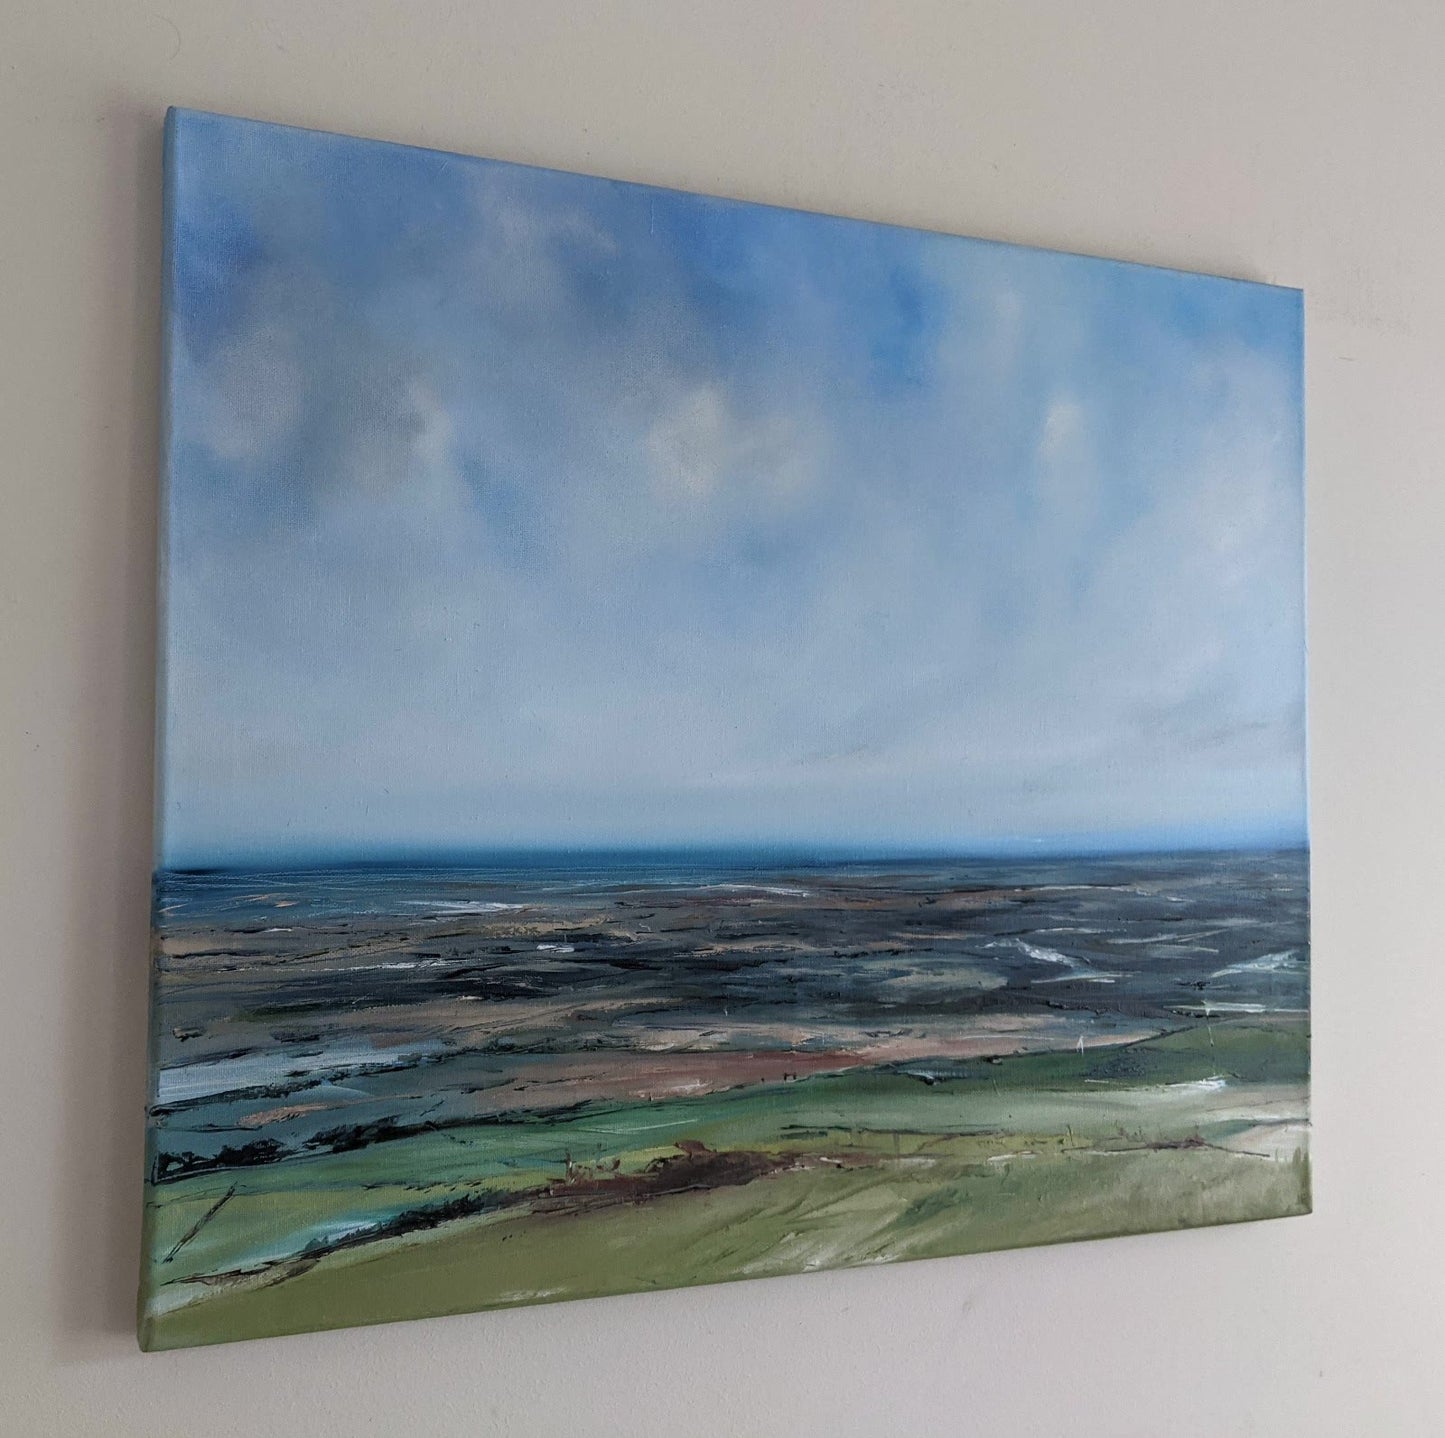 Coombe Hill Landscape oil painting on canvas in studio, by Jo Earl